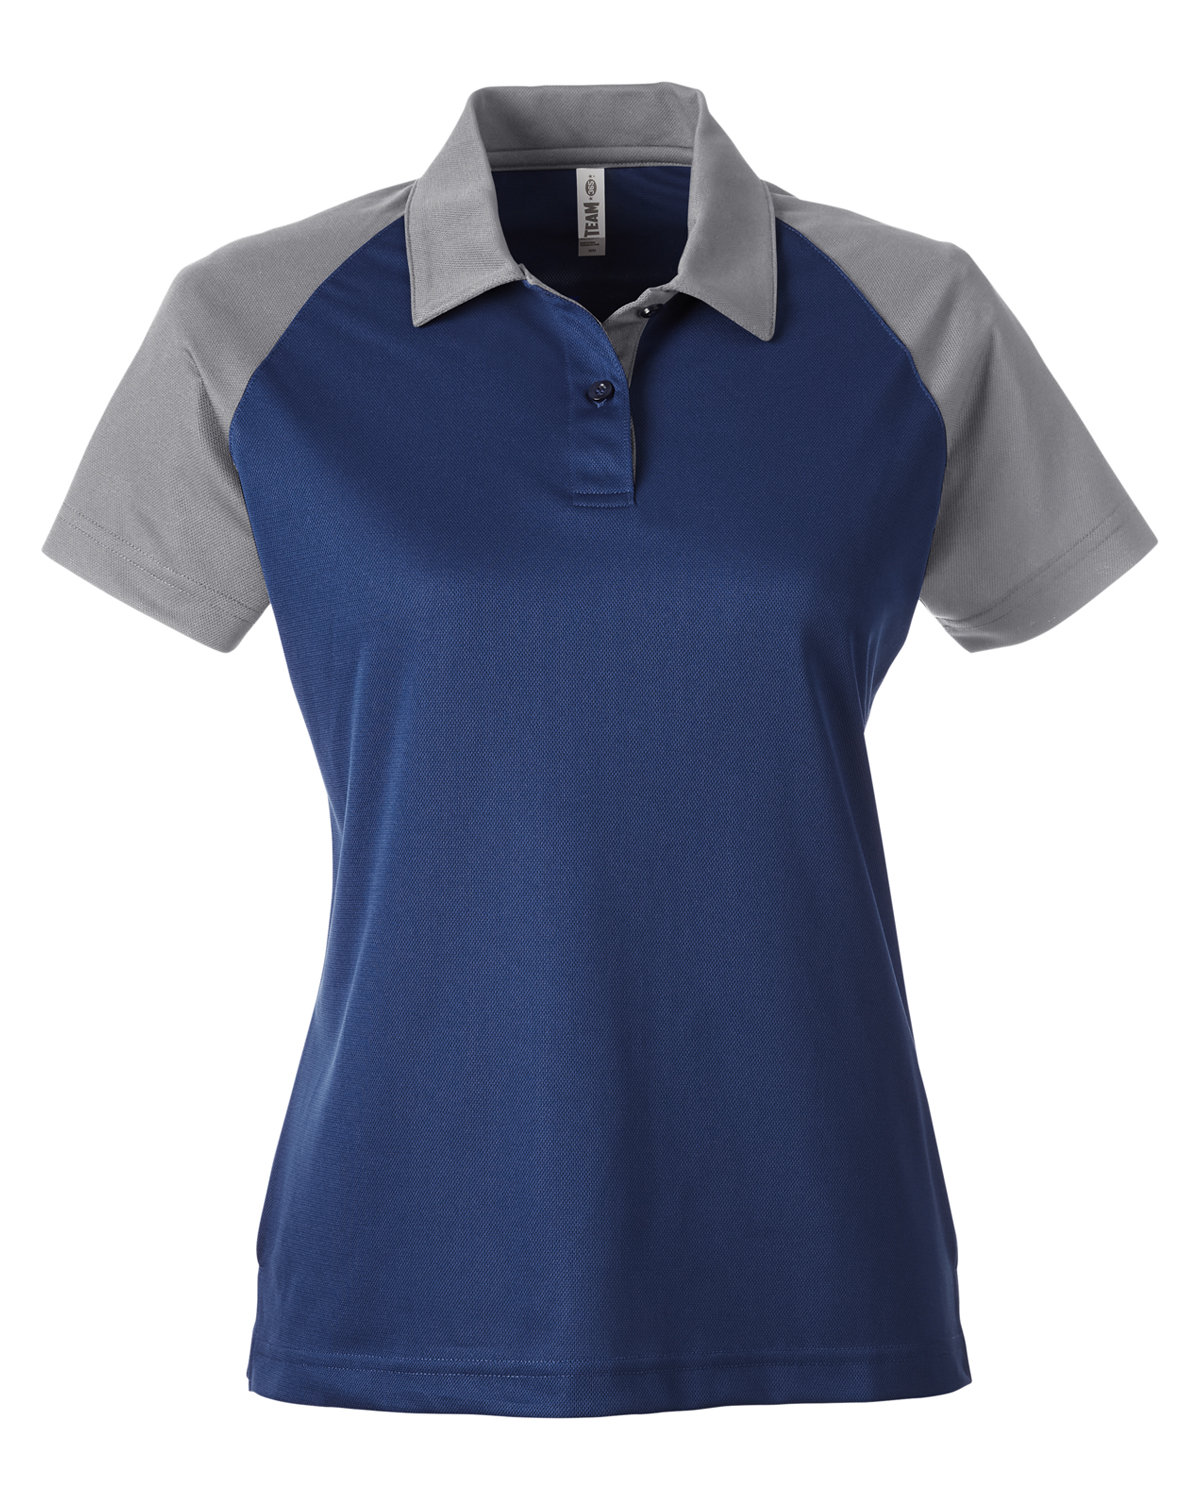 Picture of Team 365 Women's Command Snag-Protection Colorblock Polo